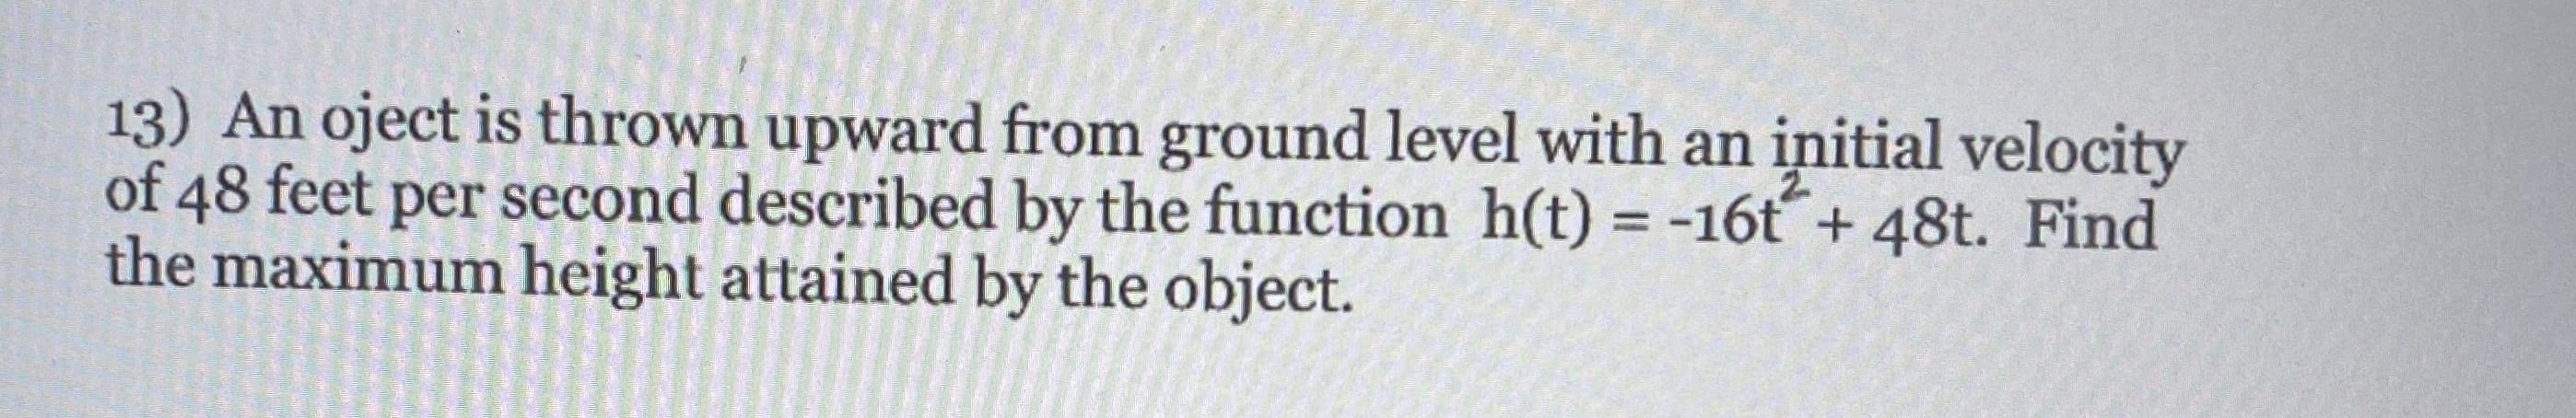 13) An oject is thrown upward from ground level with an initial velocity
of 48 feet per second described by the function h(t) = -16t+ 48t. Find
the maximum height attained by the object.
